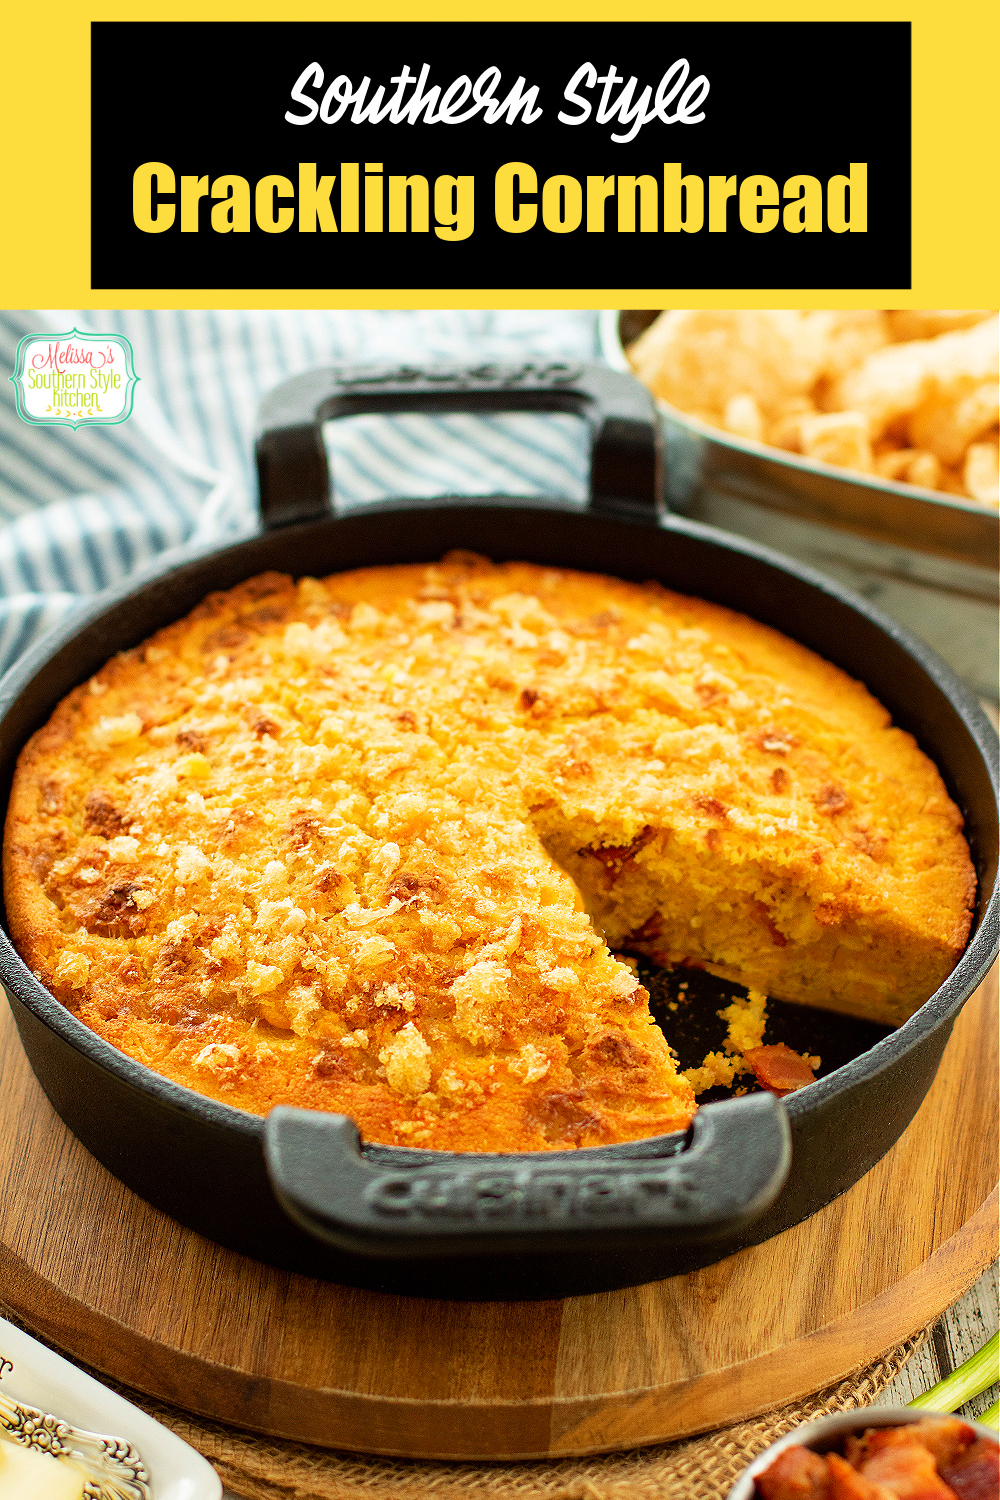 This homemade Crackling Cornbread recipe is embellished with chopped pork cracklins' and smoky bacon to give it another level of flavor. #cornbread #cornbreadrecipe #southerncornbread #homemadecornbread #cracklings #porkrinds #whatarecracklings #cracklingcornbread